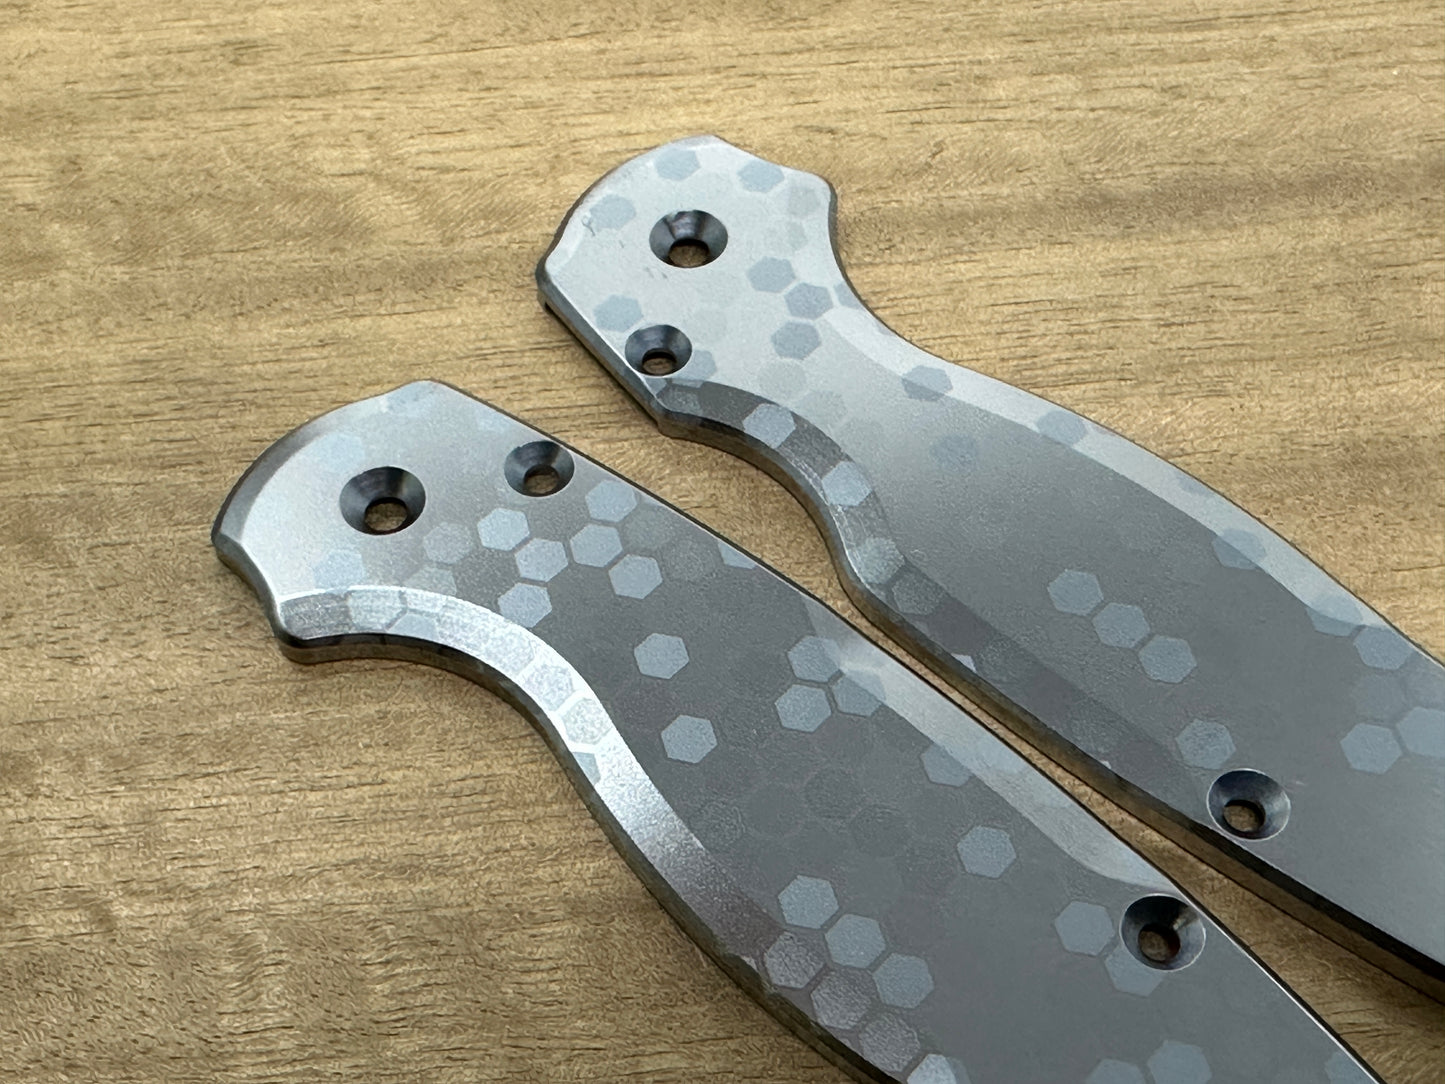 HONEYCOMB Black-Silver Heat ano Titanium scales for Spyderco Paramilitary 2 PM2